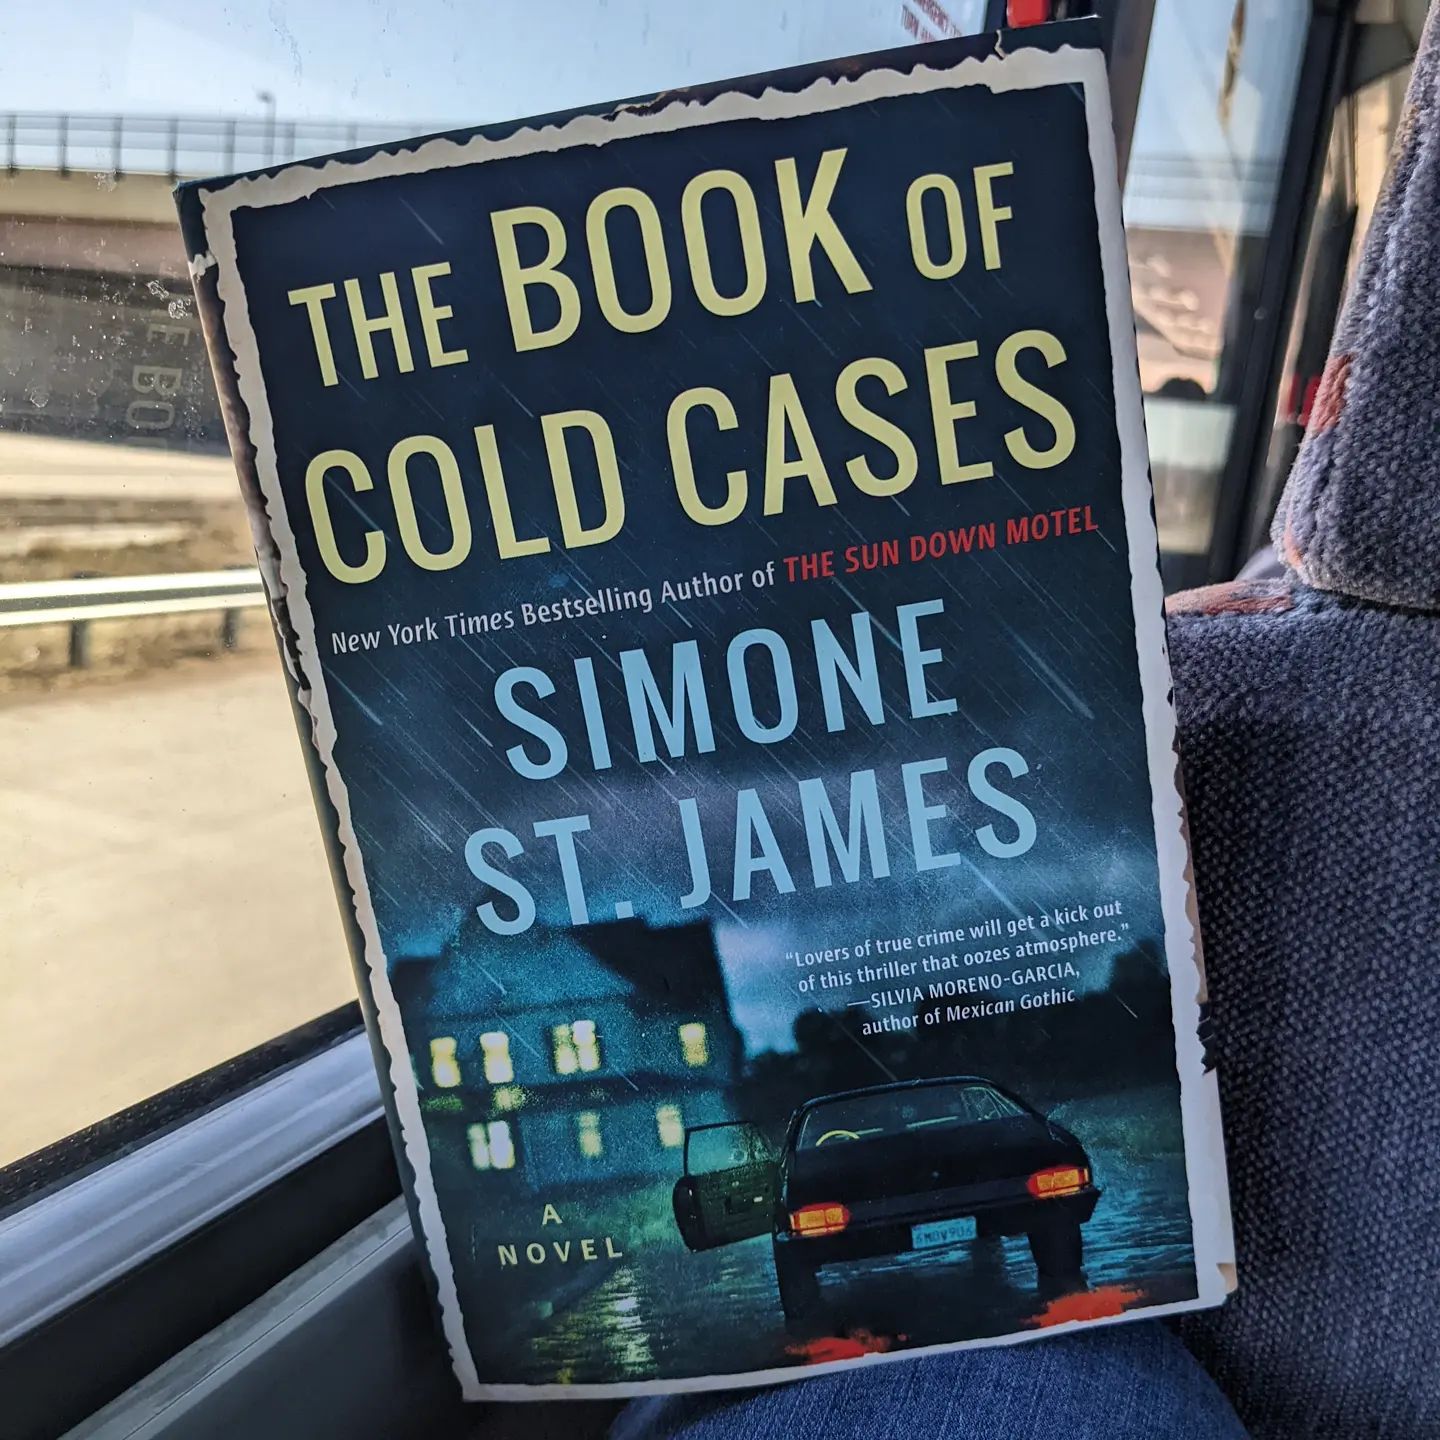 Though I didn't expect to be traveling out of state this month, I've been so glad to have some fantastic reading with me. 
✨
My current read: The Book of Cold Cases by @simonestjames.
✨
I love it so far!
✨
Pitch: A true crime blogger gets more than she bargained for while interviewing the woman acquitted of two cold case slayings in this chilling new novel from the New York Times bestselling author of The Sun Down Motel.
_________
#thebookofcoldcases #amreading